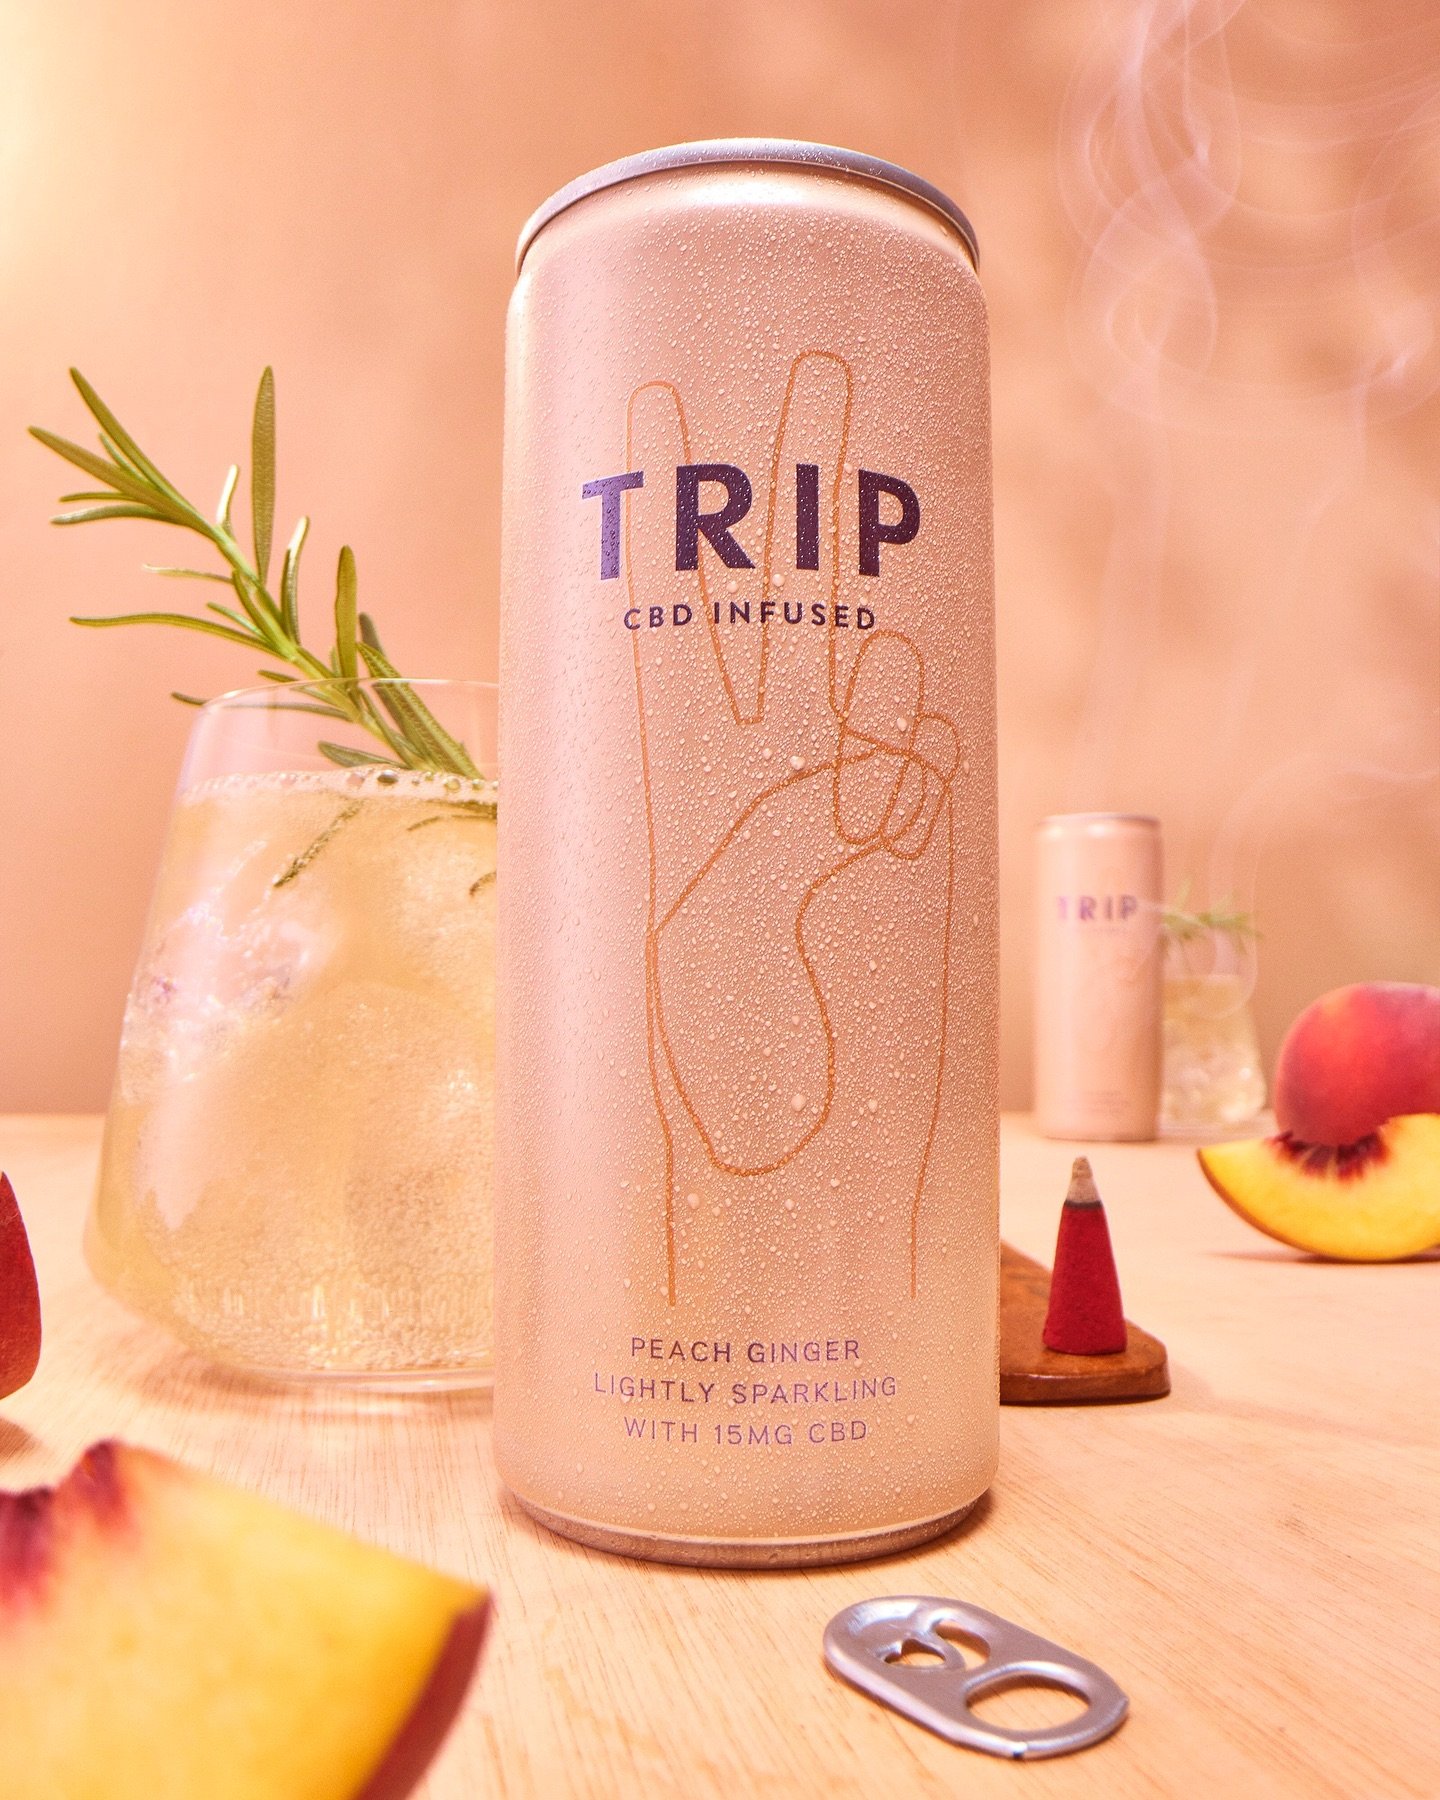 5pm on Friday&hellip;.aaaaaand relax @trip.drinks 💛 

@atrare.co #cannedcocktails #cocktail #can #cbd #cbddrink #chloehardwickphotography #atrare